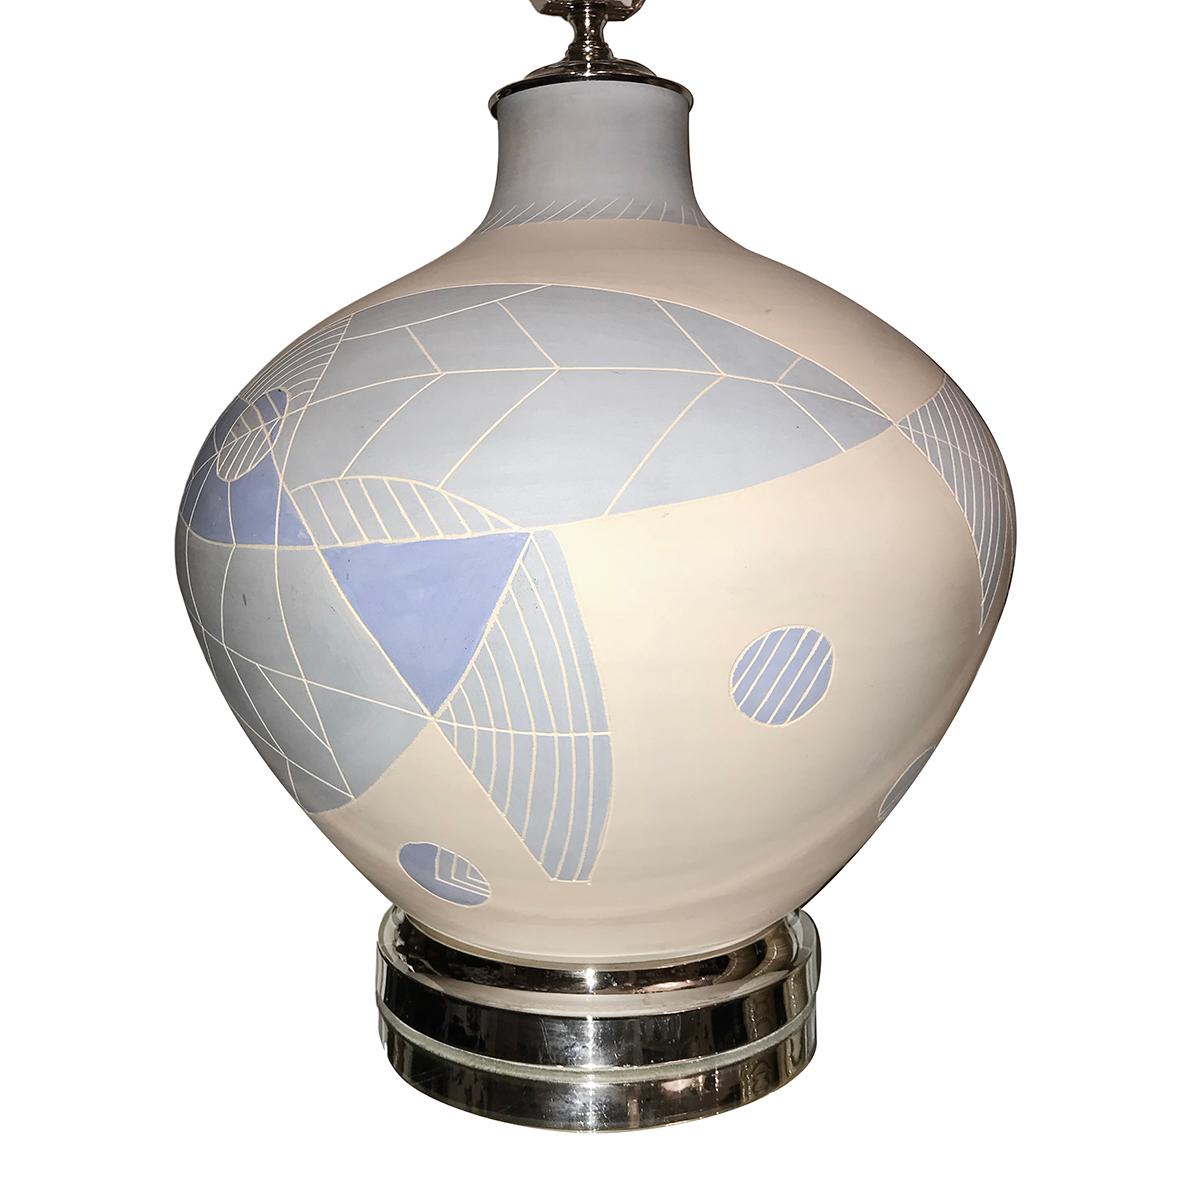 A large circa 1960's Italian ceramic table lamp with white and blue tones and nickel-plated base.

Measurements:
Height of body: 17.5